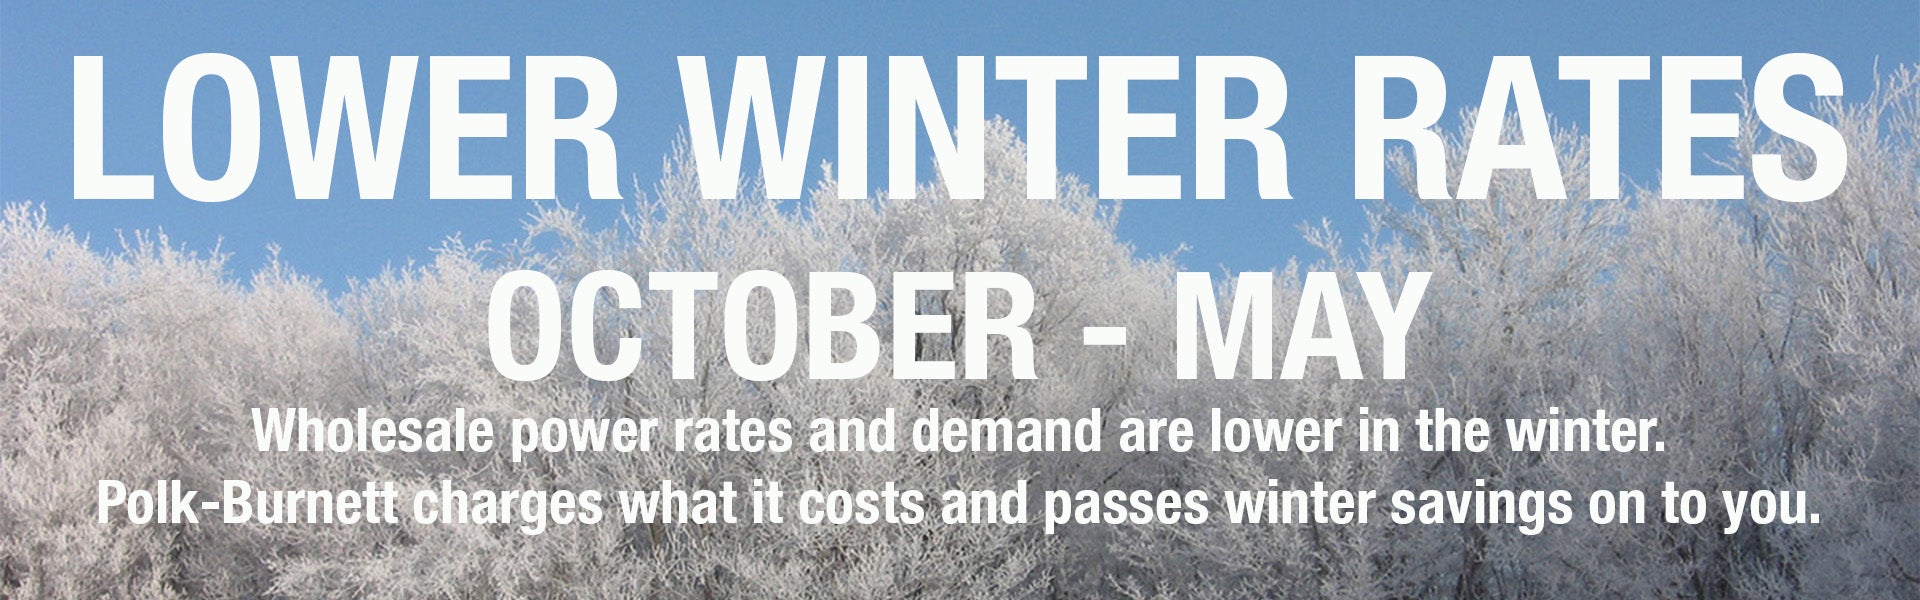 Lower winter rates Oct. - May